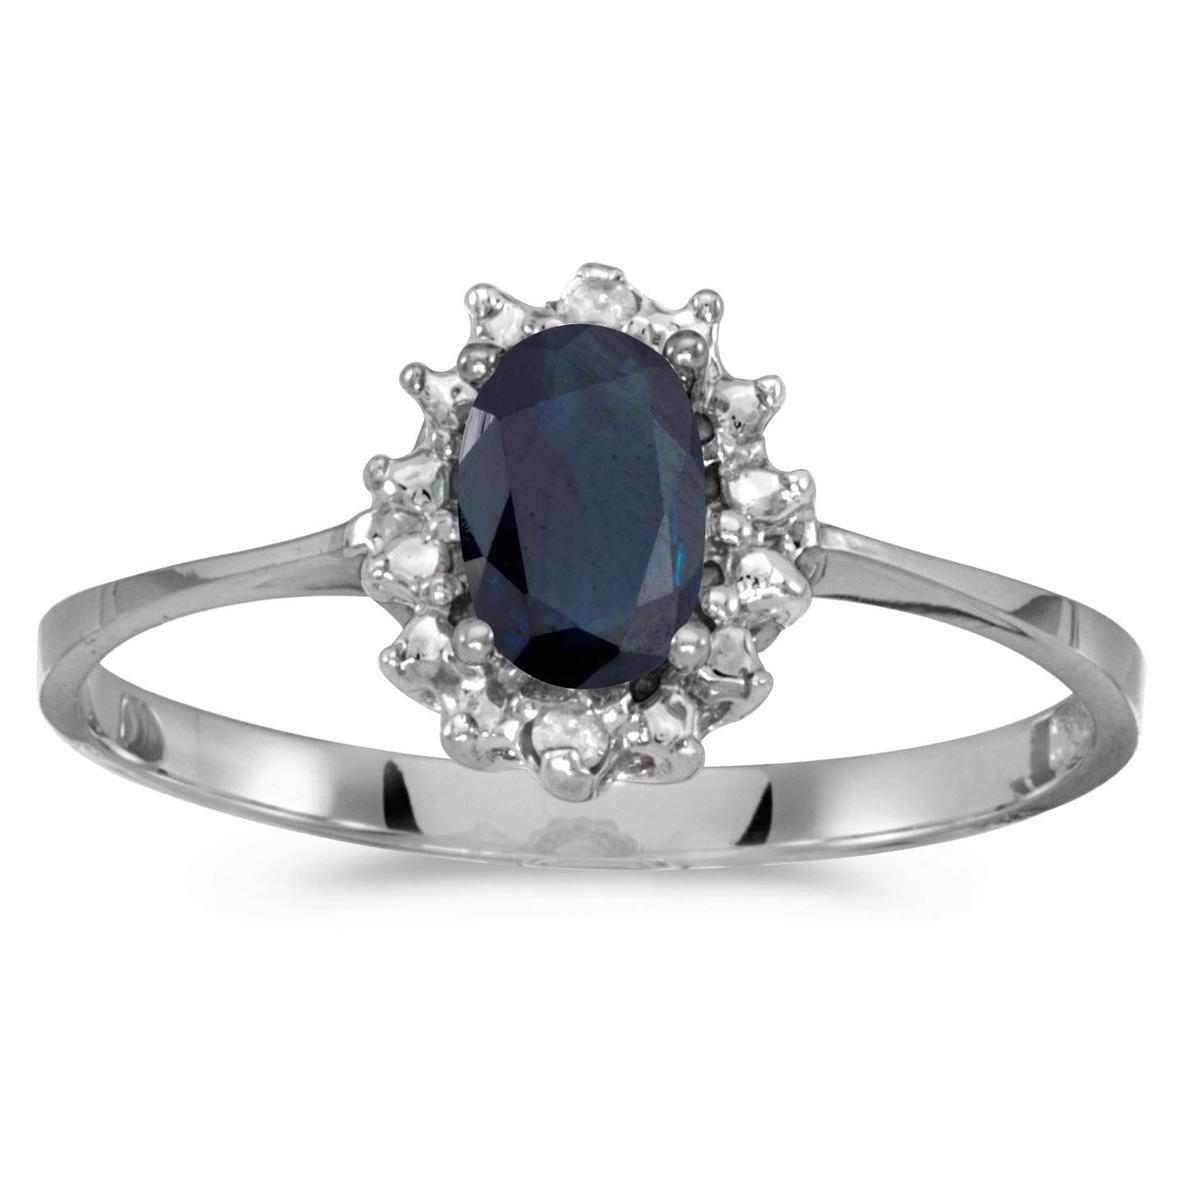 Certified 10k White Gold Oval Sapphire And Diamond Ring 0.41 CTW